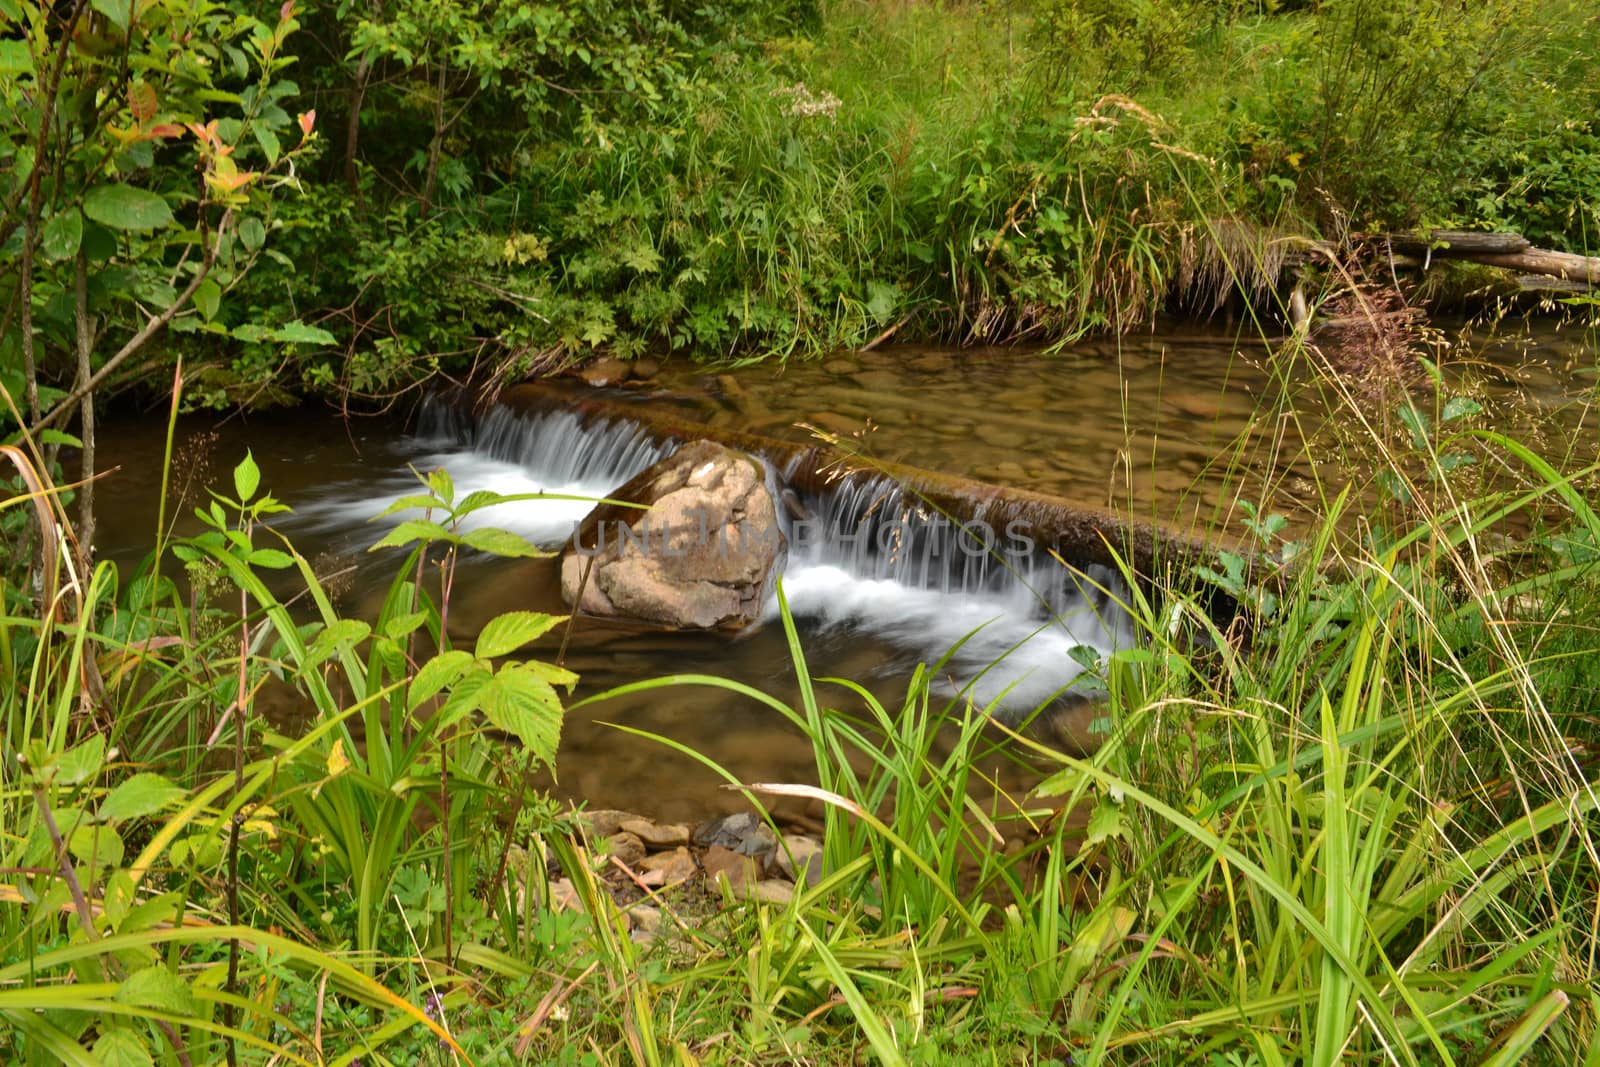 river flows quickly through the stone bottom